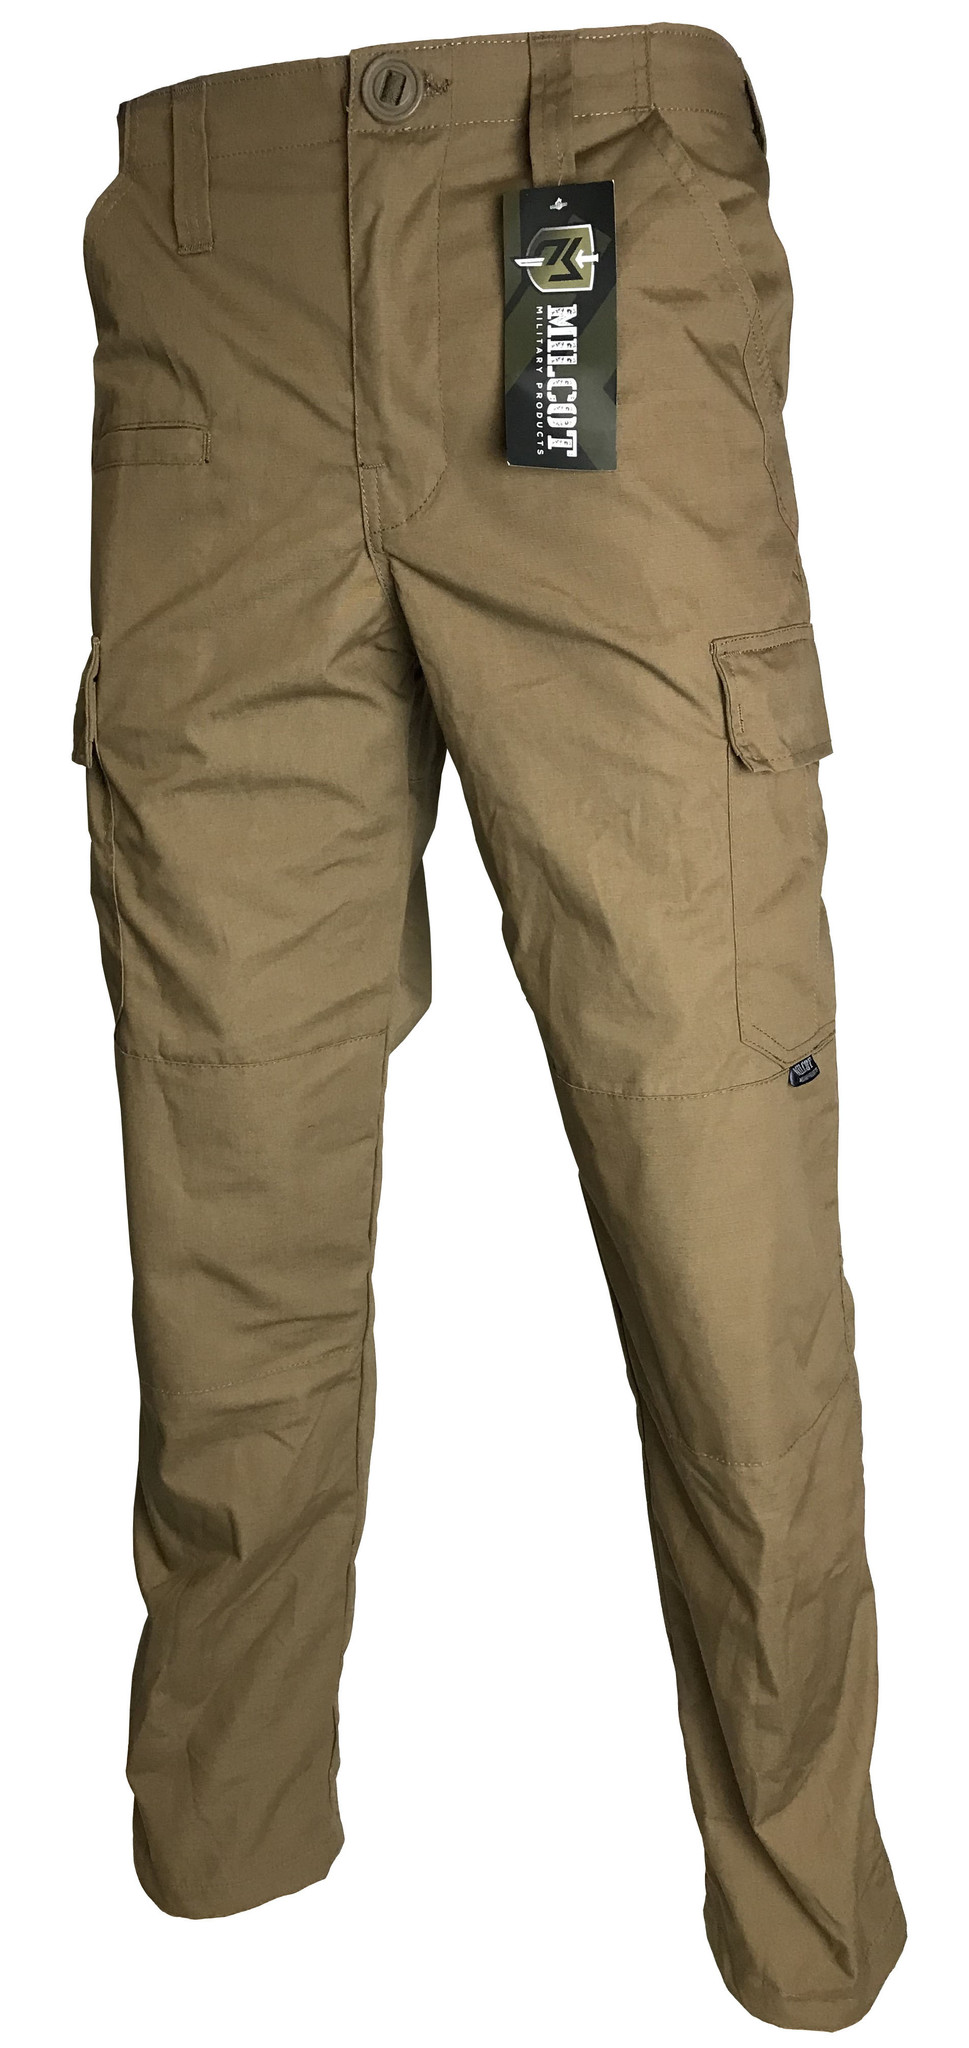 Camouflage Cargo Pant at Best Price in India